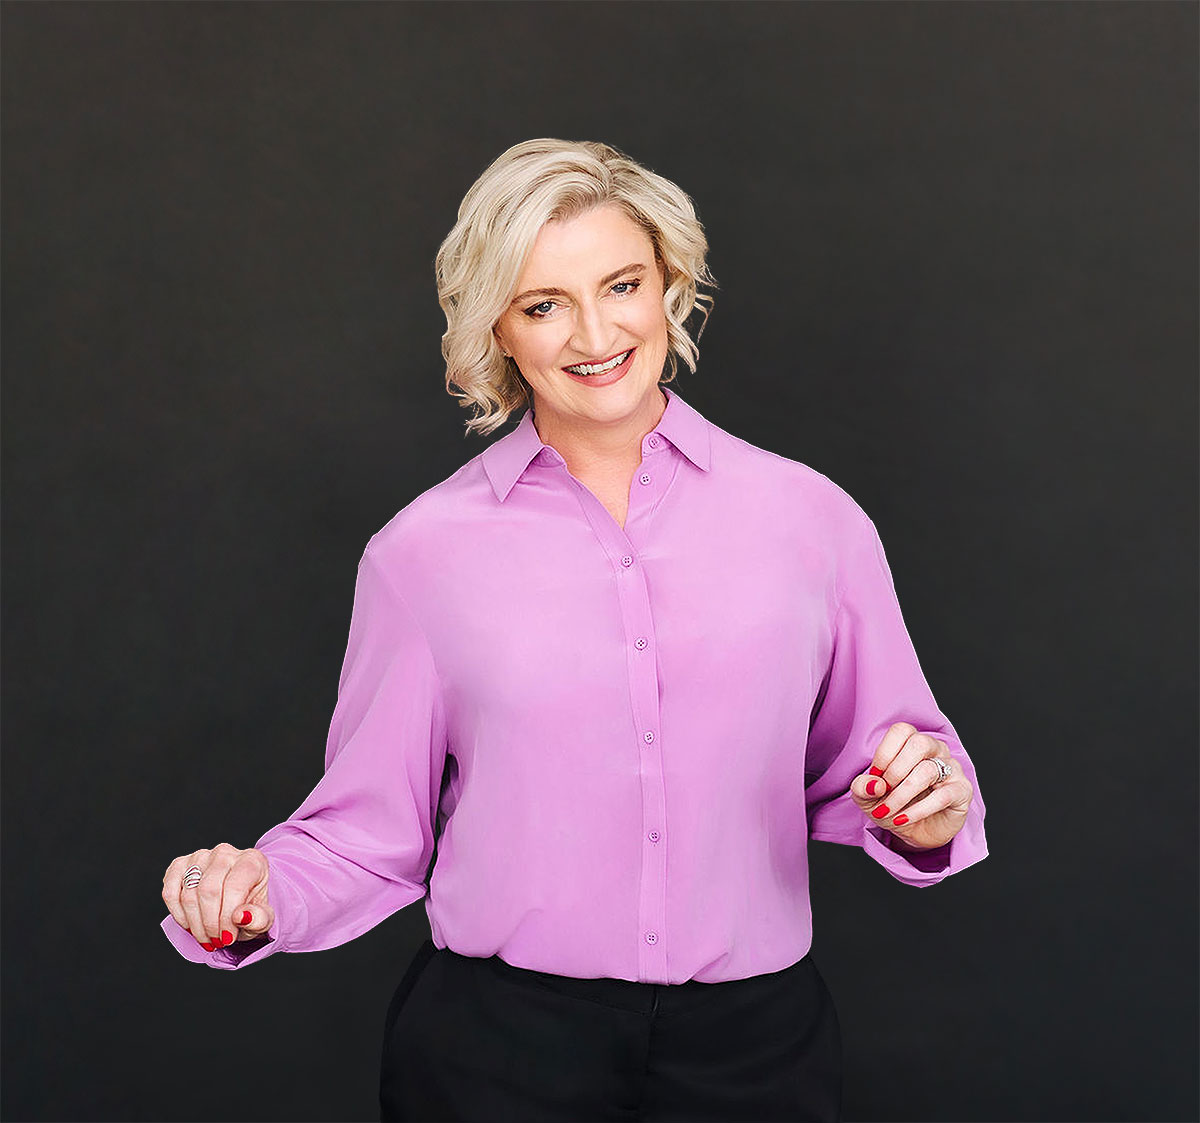 julie-hyde-making-it-count-busy-leadership-leader-leaders-keynote-mindset-speaker-mentor-business-empower-lead-empowering-podcast-great-intentional-authentic-mentor-coach-role-model-top-best-inspire-engage-practical-insightful-boost-performance-tips-how-to-strategy-powerful-change-mindset-thrive-results-corporate-future-smart-program-mentorship-career-next-level-step-reconnect-control-proactive-agile-adaptable-one-on-one-woman-lady-boss-female-sydney-australia-speaker-host-guide-guidance-business-ceo-management